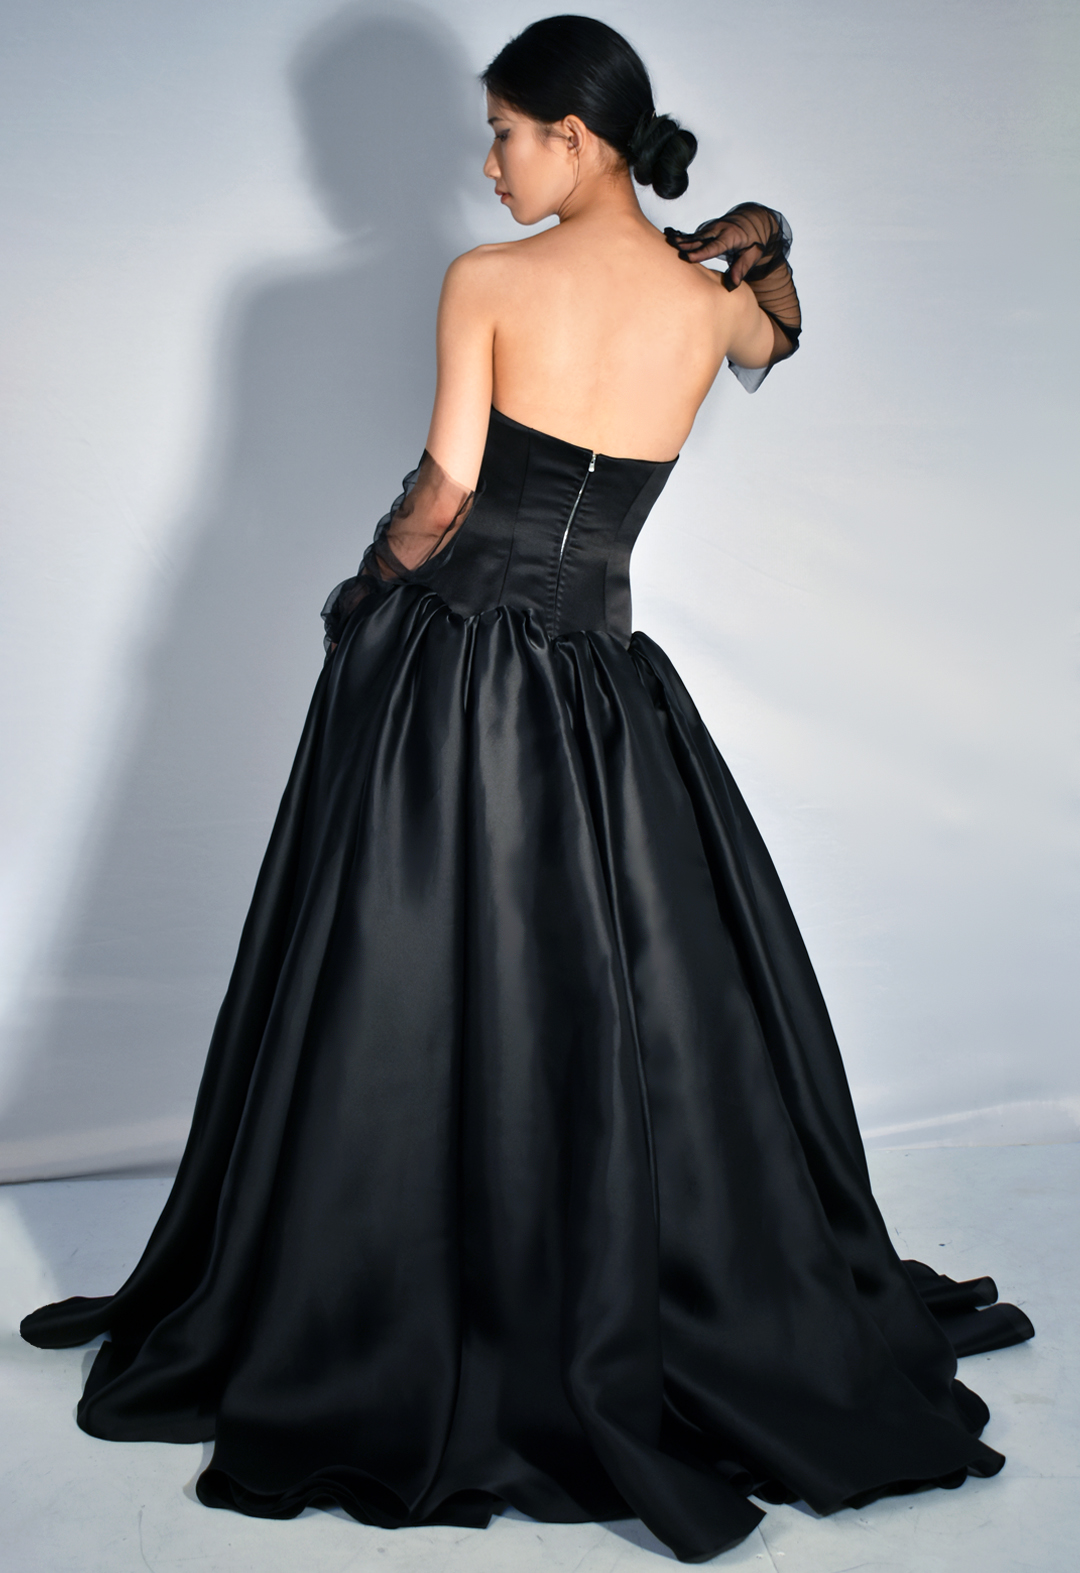 This black gown is made from 100 percent silk. The photo shows a back view of a woman wearing a black floor-length silk gown that has a drop-waist duchesse satin bodice with cone-like satin-faced organza skirt panels gathered along the drop-waist, pooling onto the floor. The back of the gown has a silver metal zipper. The model is wearing black tulle gloves that cover three-quarters of her arms. Her head is turned to the side, and her right hand is sitting on her shoulder. The background is white.